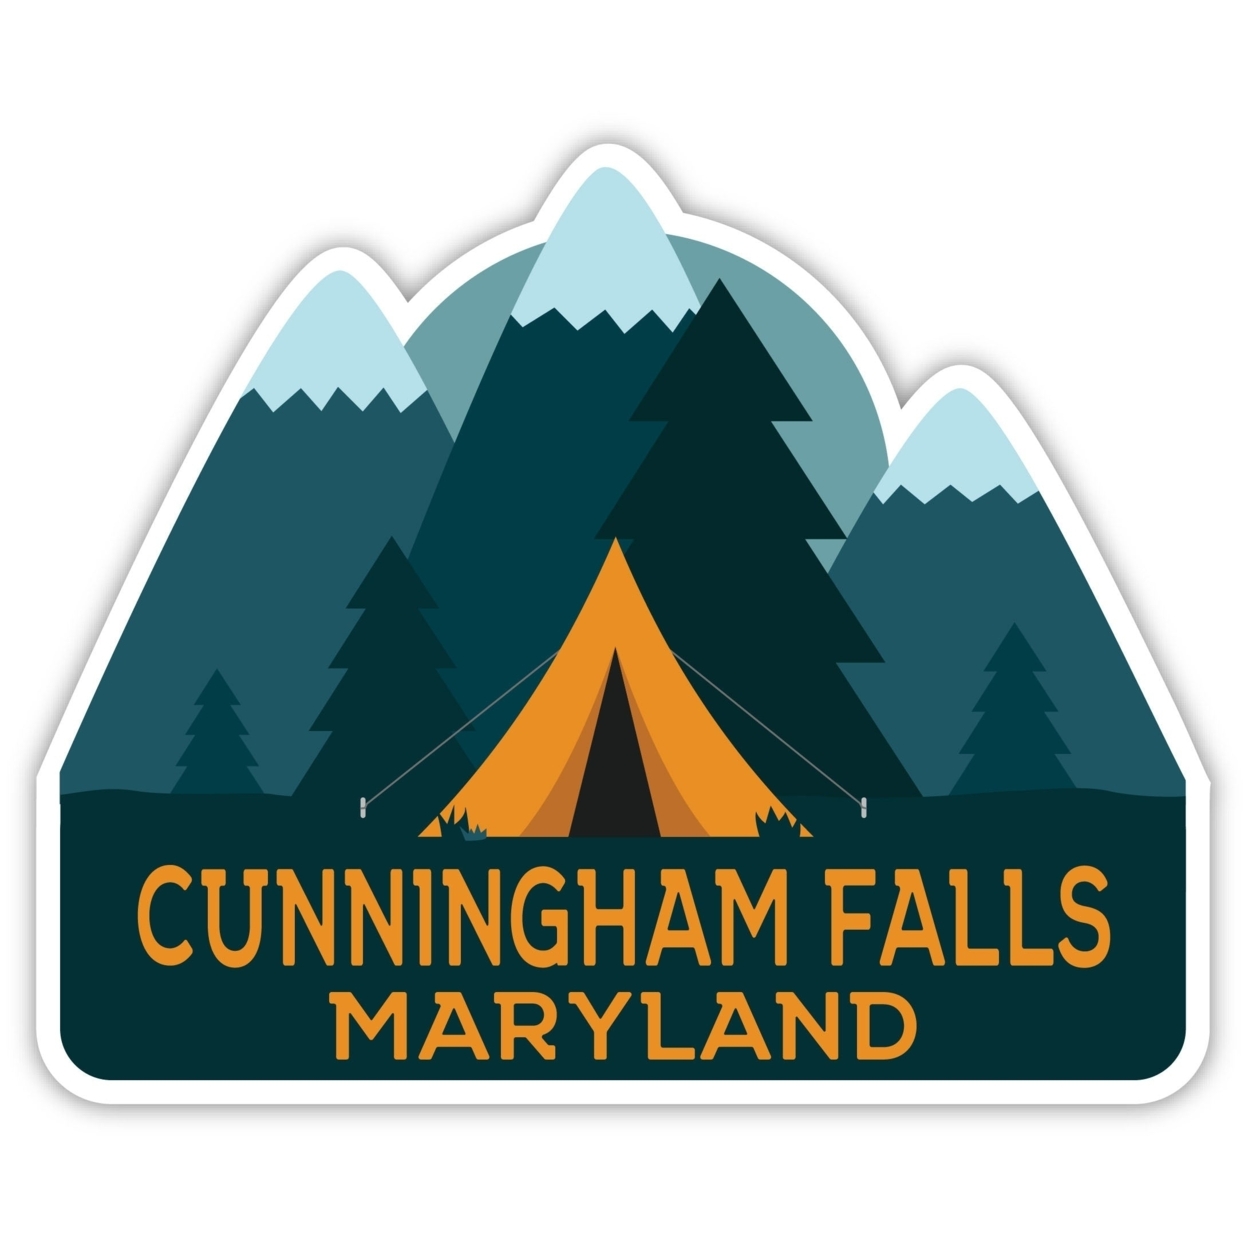 Cunningham Falls Maryland Souvenir Decorative Stickers (Choose Theme And Size) - 4-Pack, 4-Inch, Tent